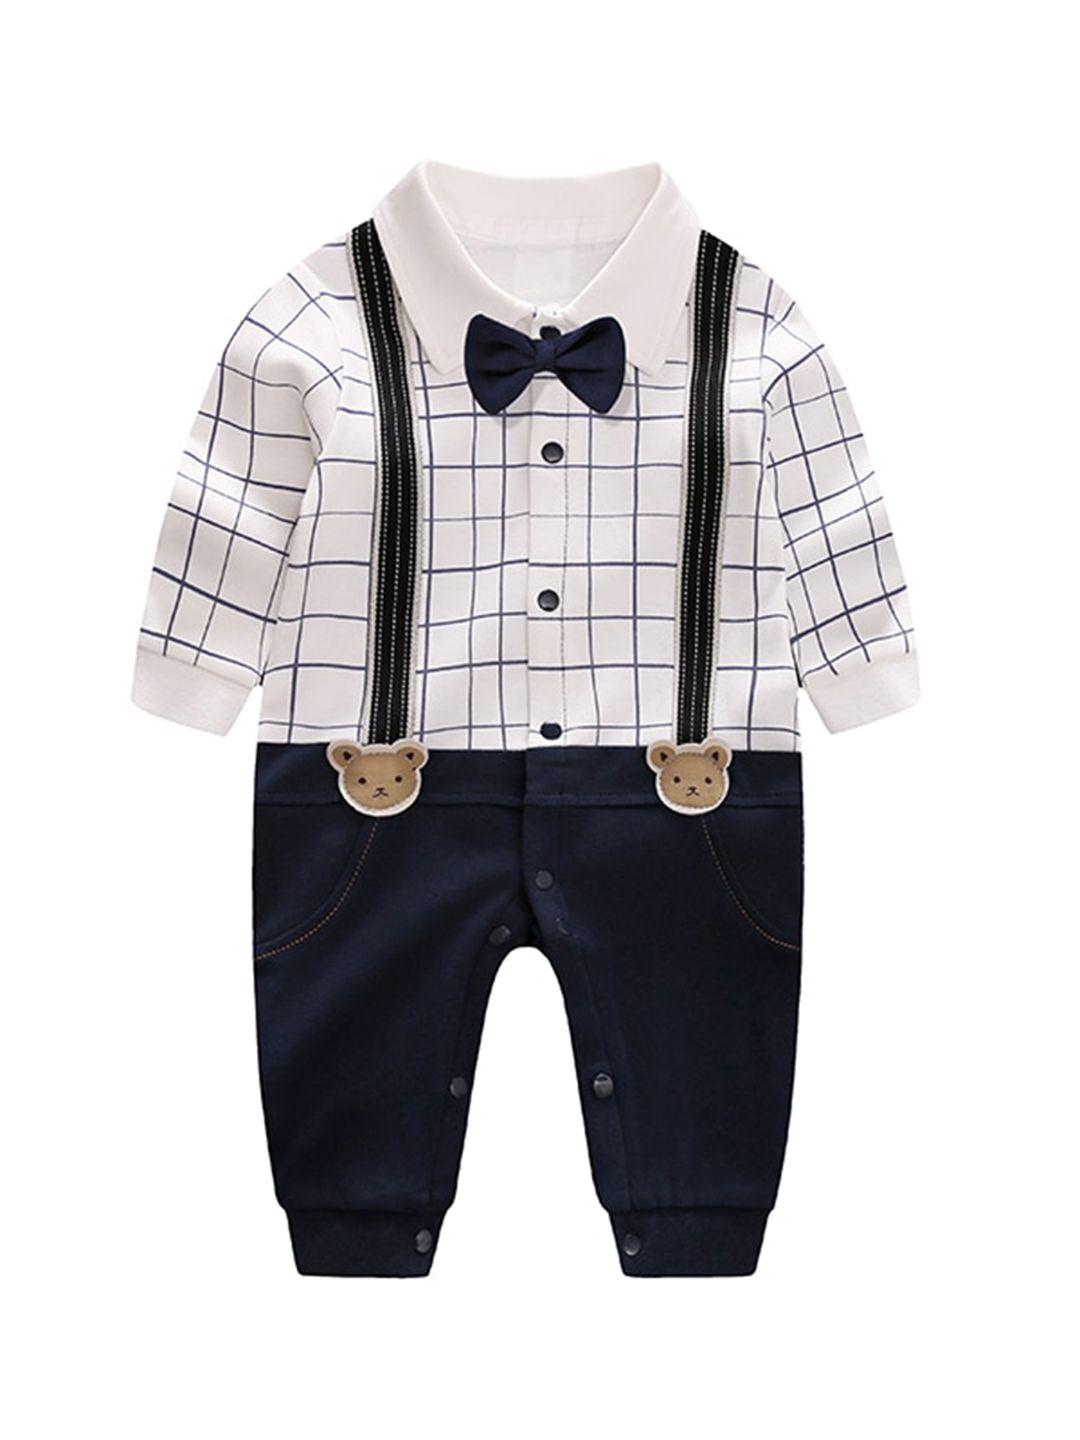 stylecast infant boys navy blue checked cotton rompers